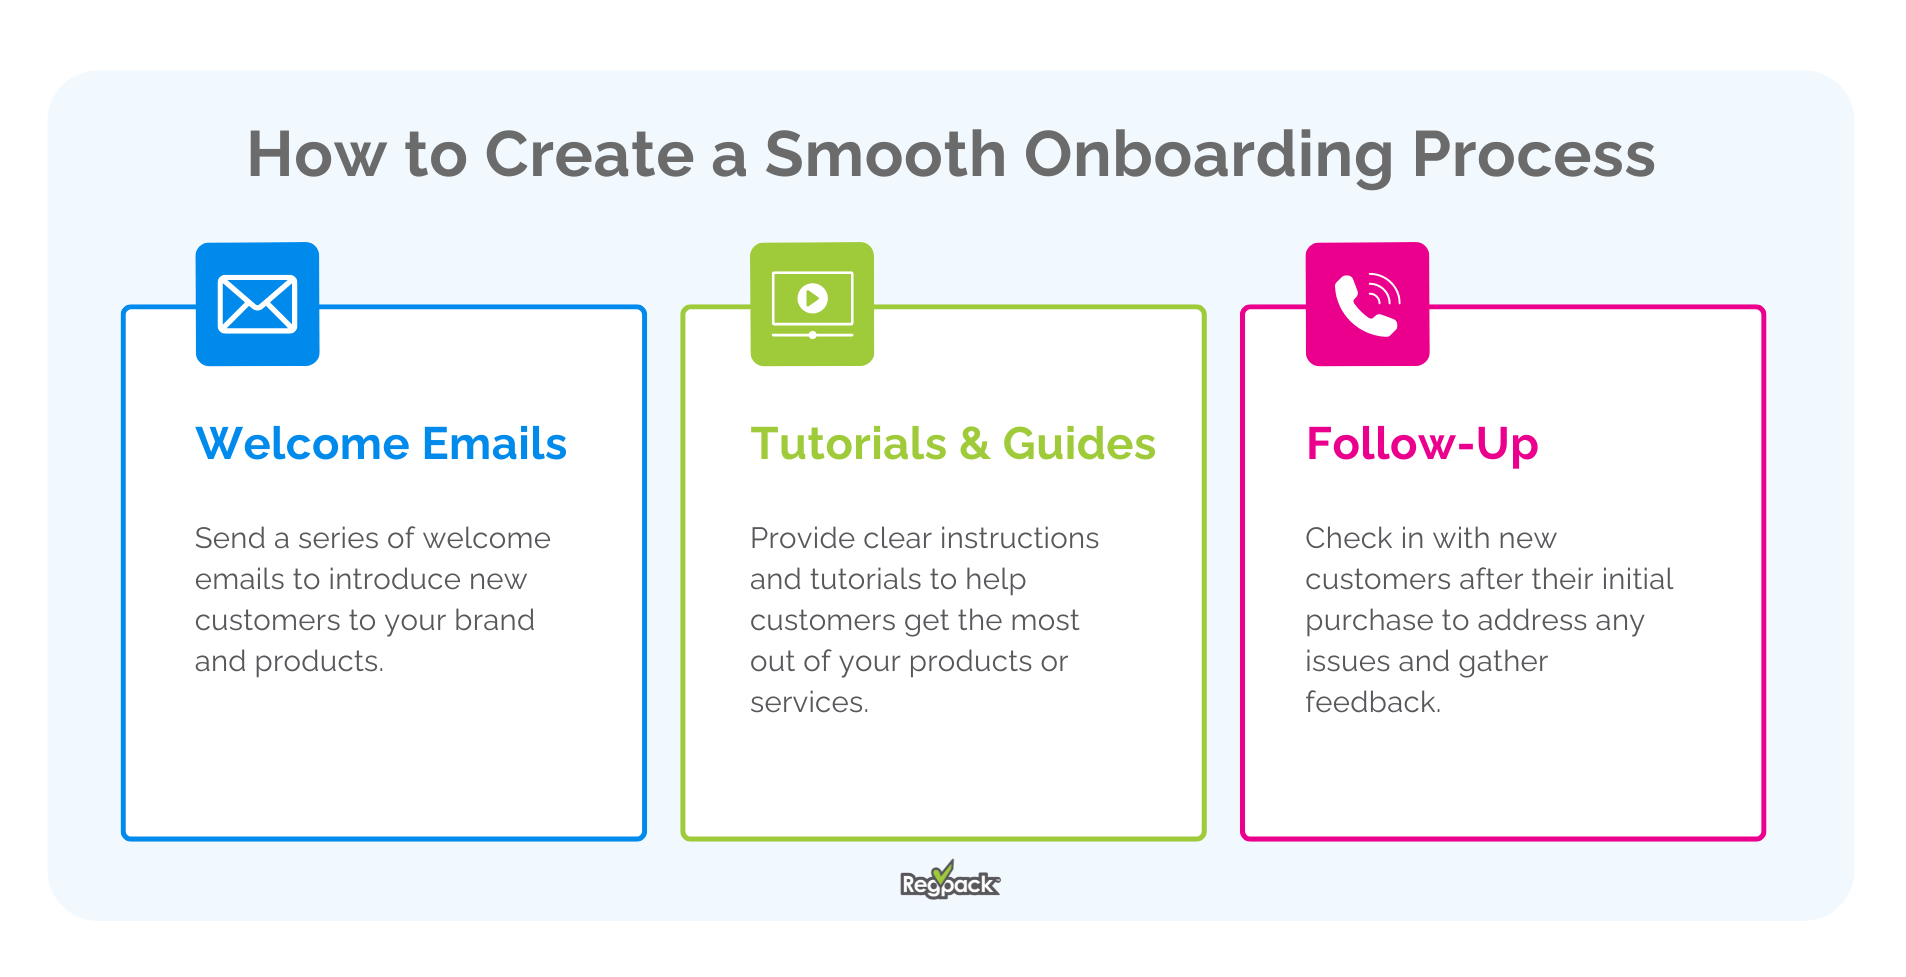 how to create an onboarding process infographic 